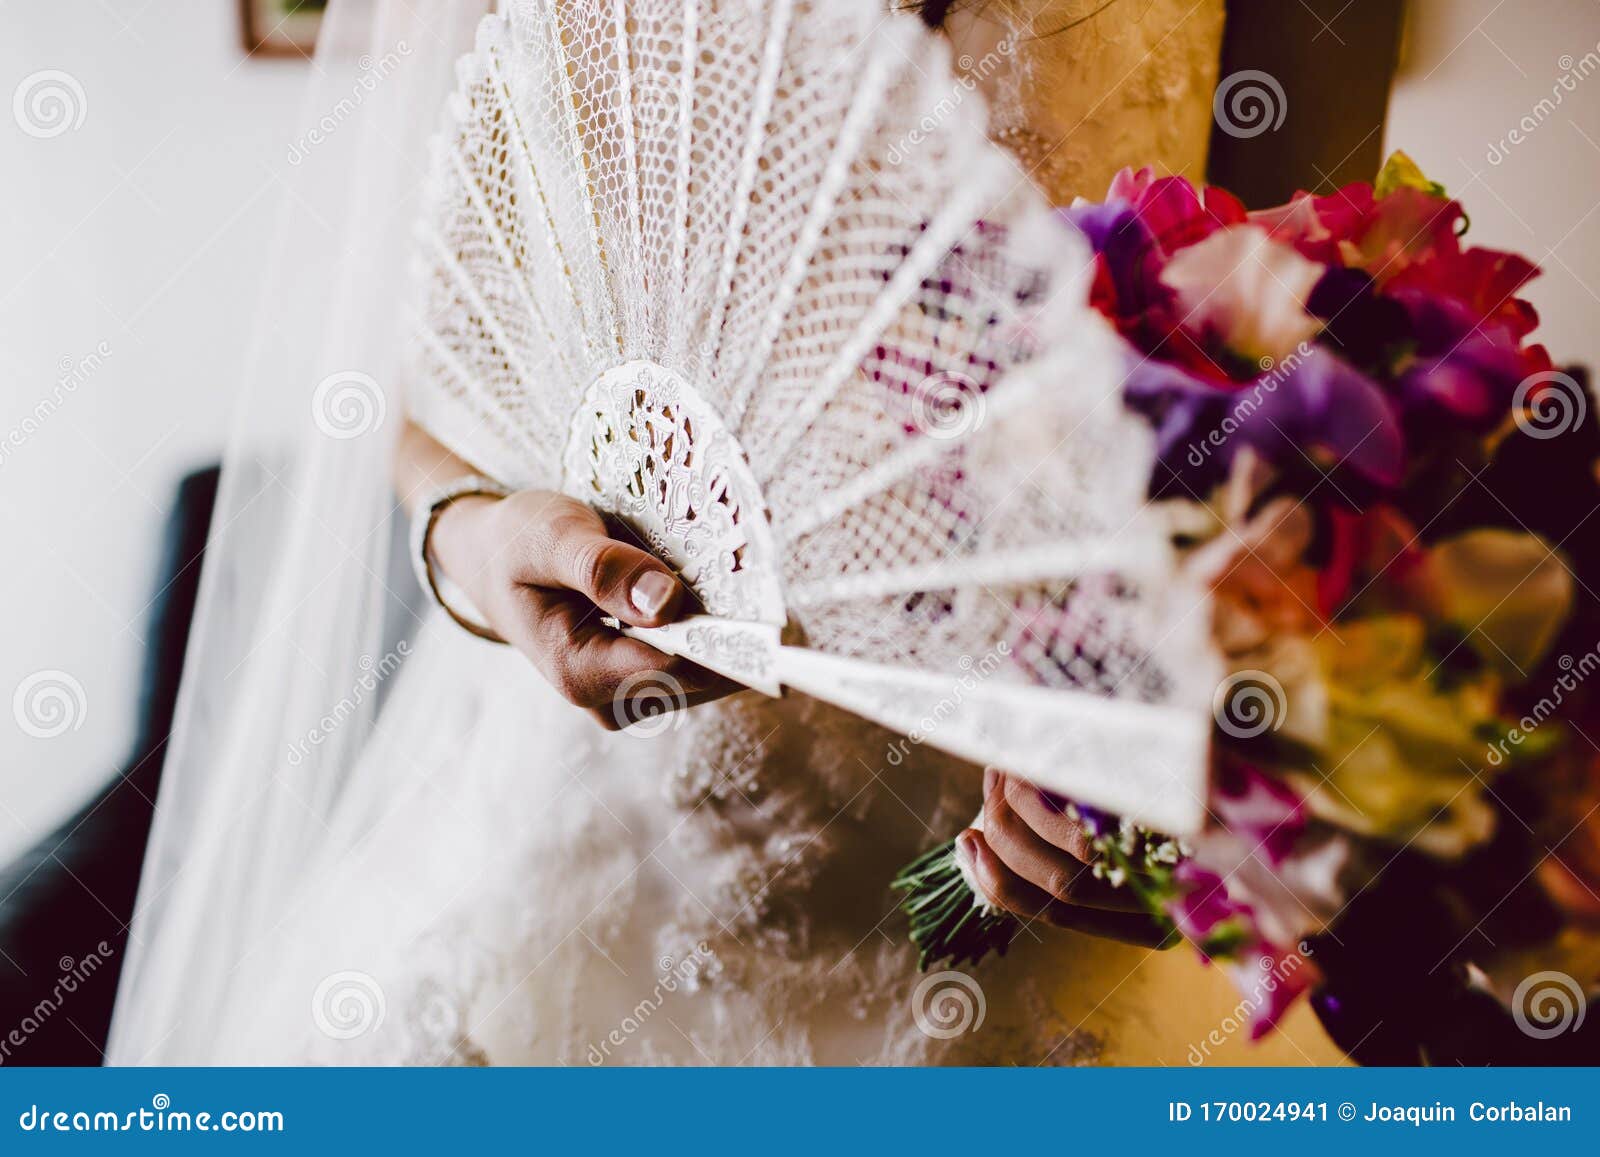 Detail of a White and Elegant Wedding Dress Stock Image - Image of ...